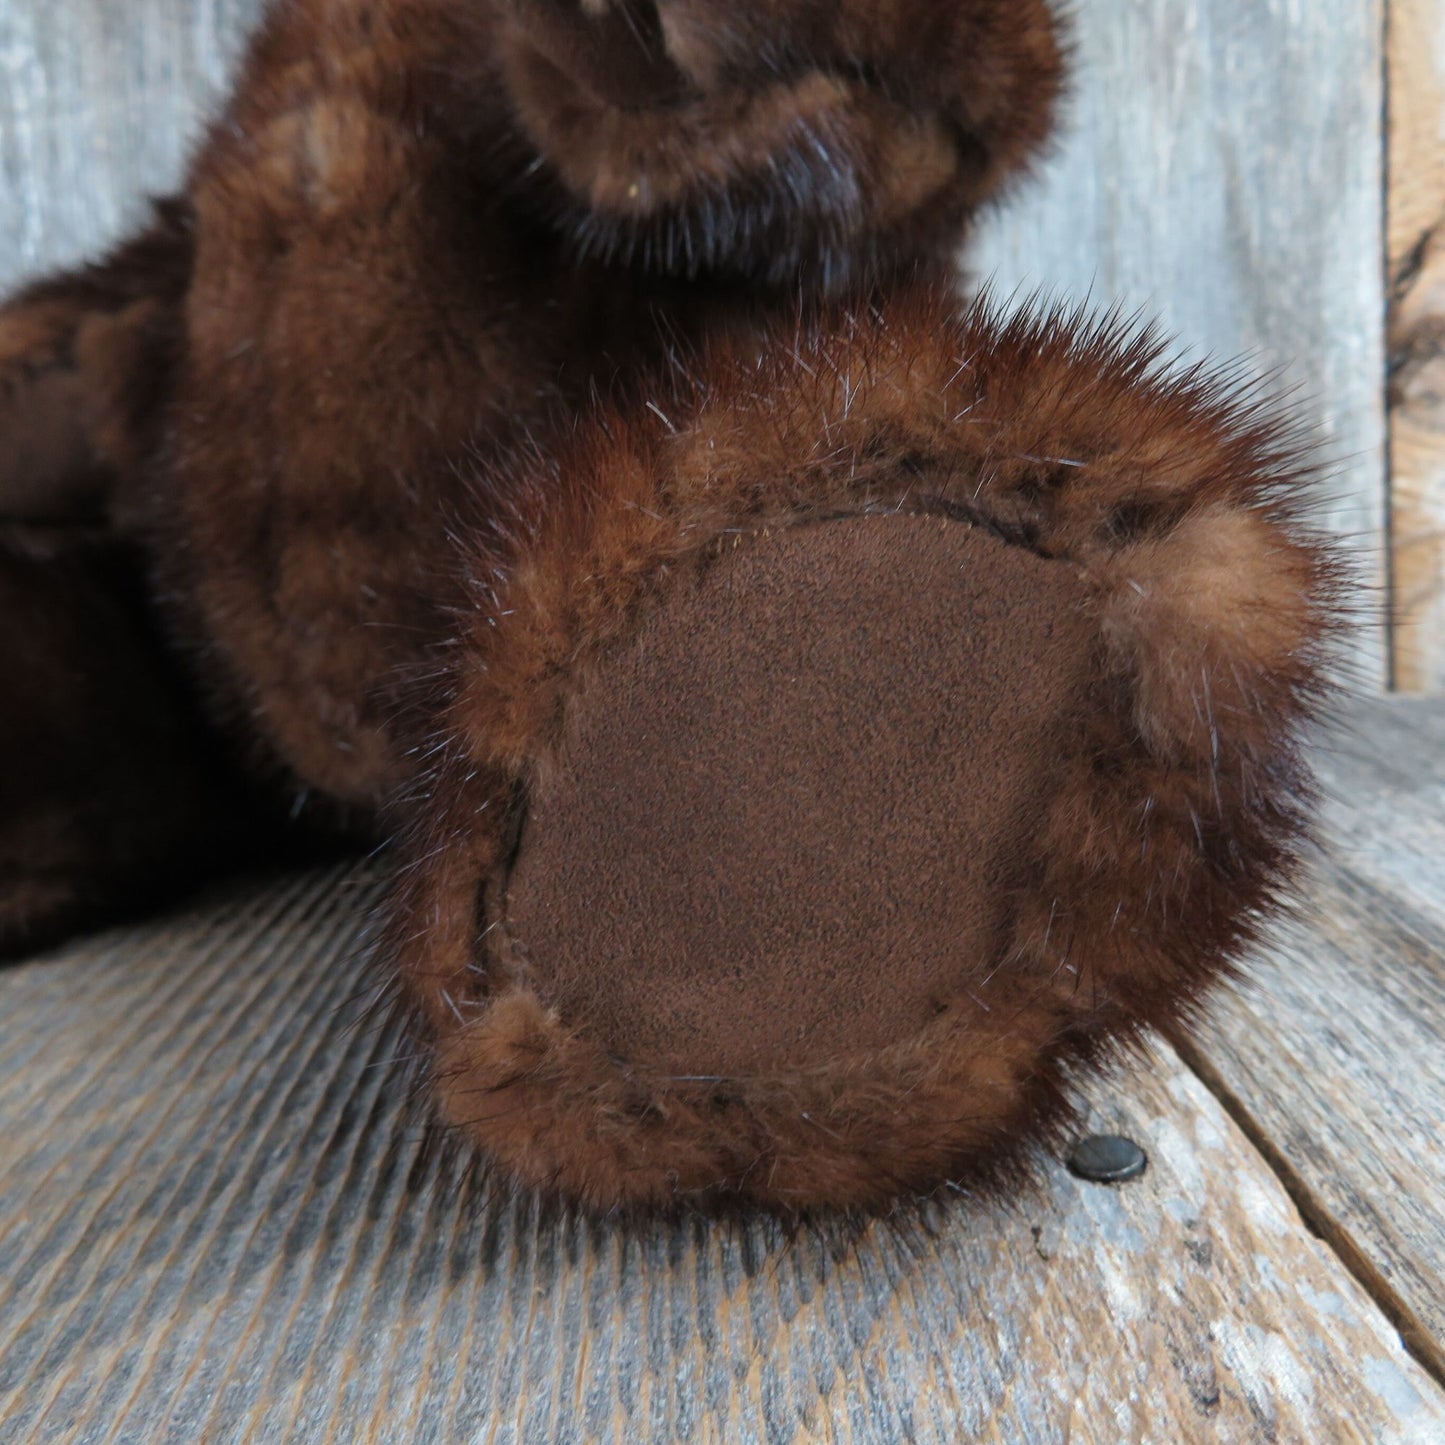 Vintage Jointed Teddy Bear Plush Real Fur Stuffed Animal Brown Hair Suede Paws Glass Eyes